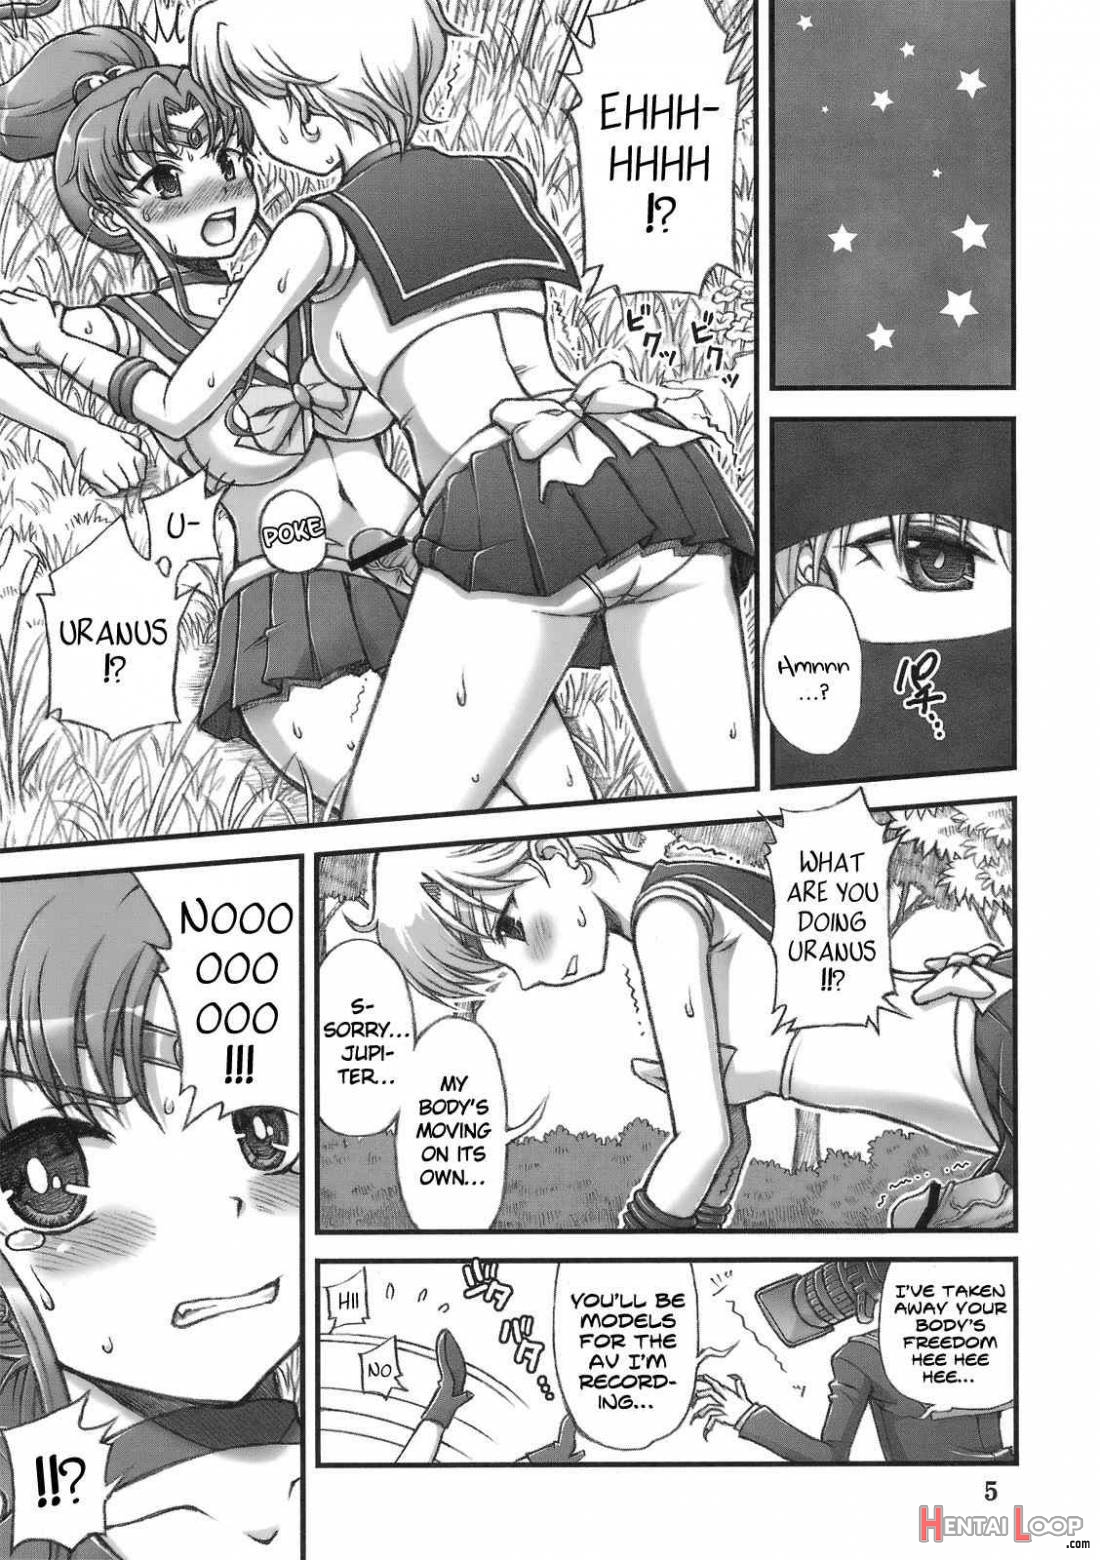 Milky Moon 3 + Omake page 3